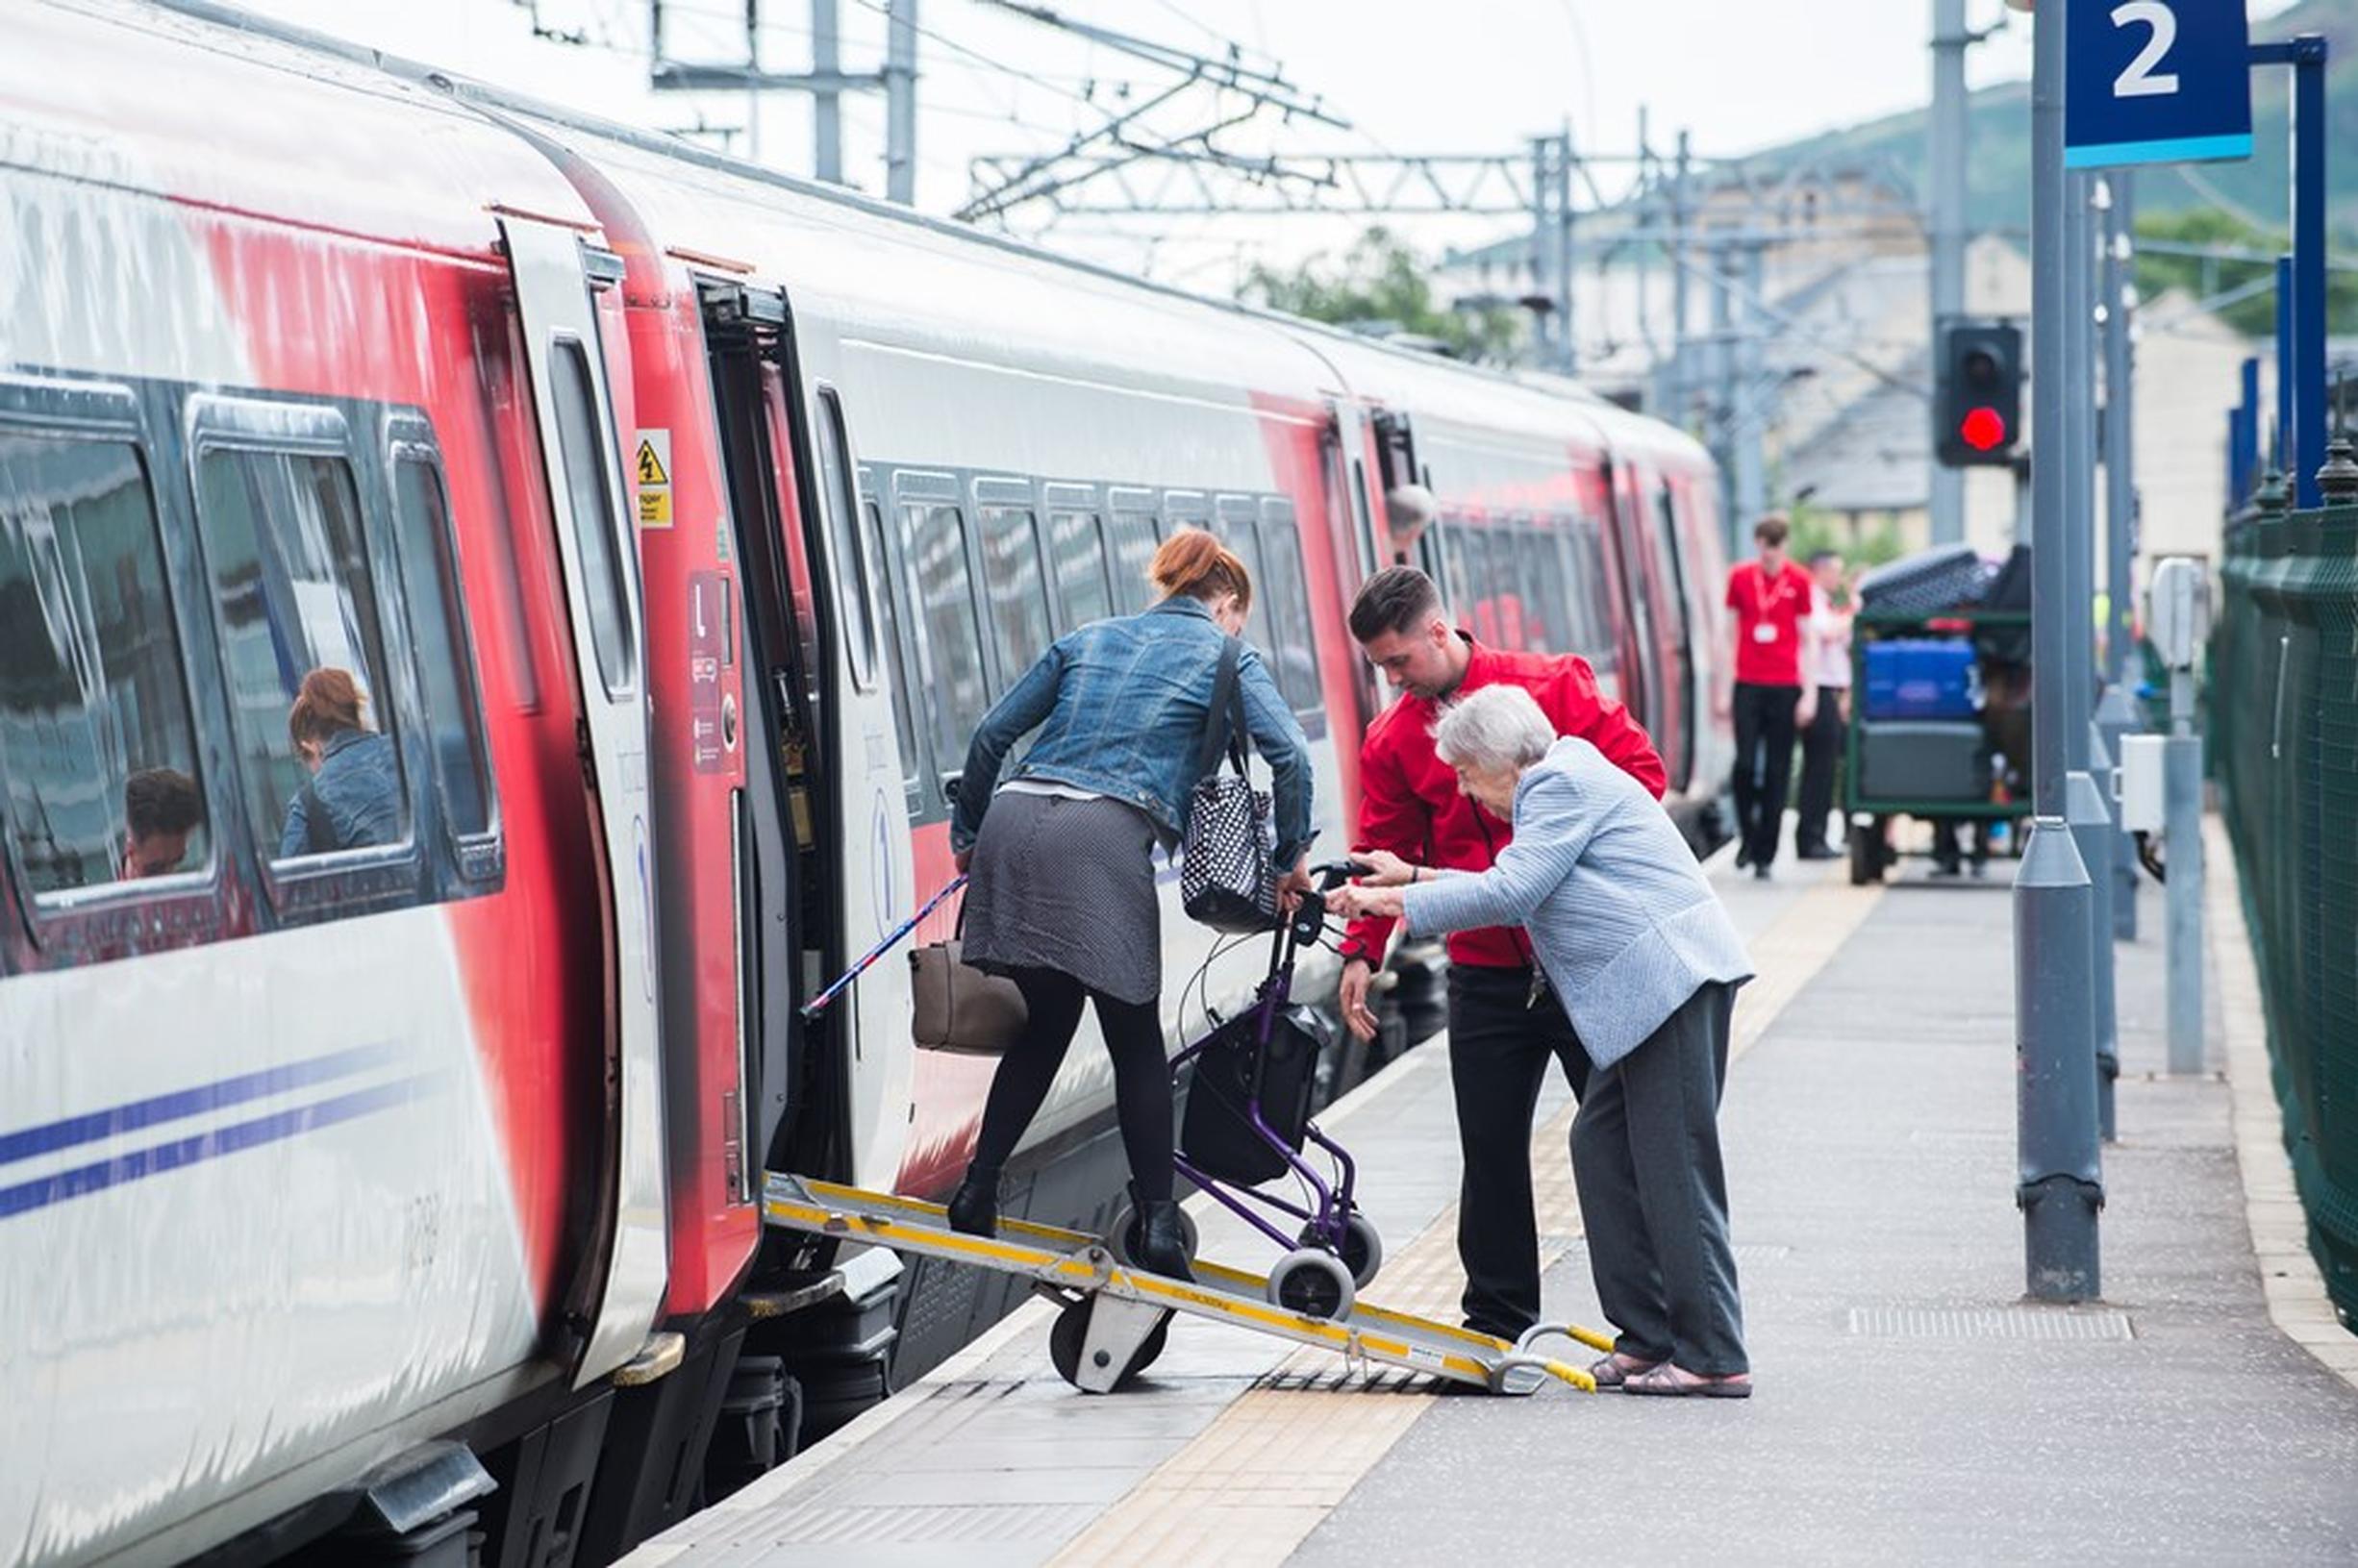 The Passenger Assist app connects customers who need help with rail staff